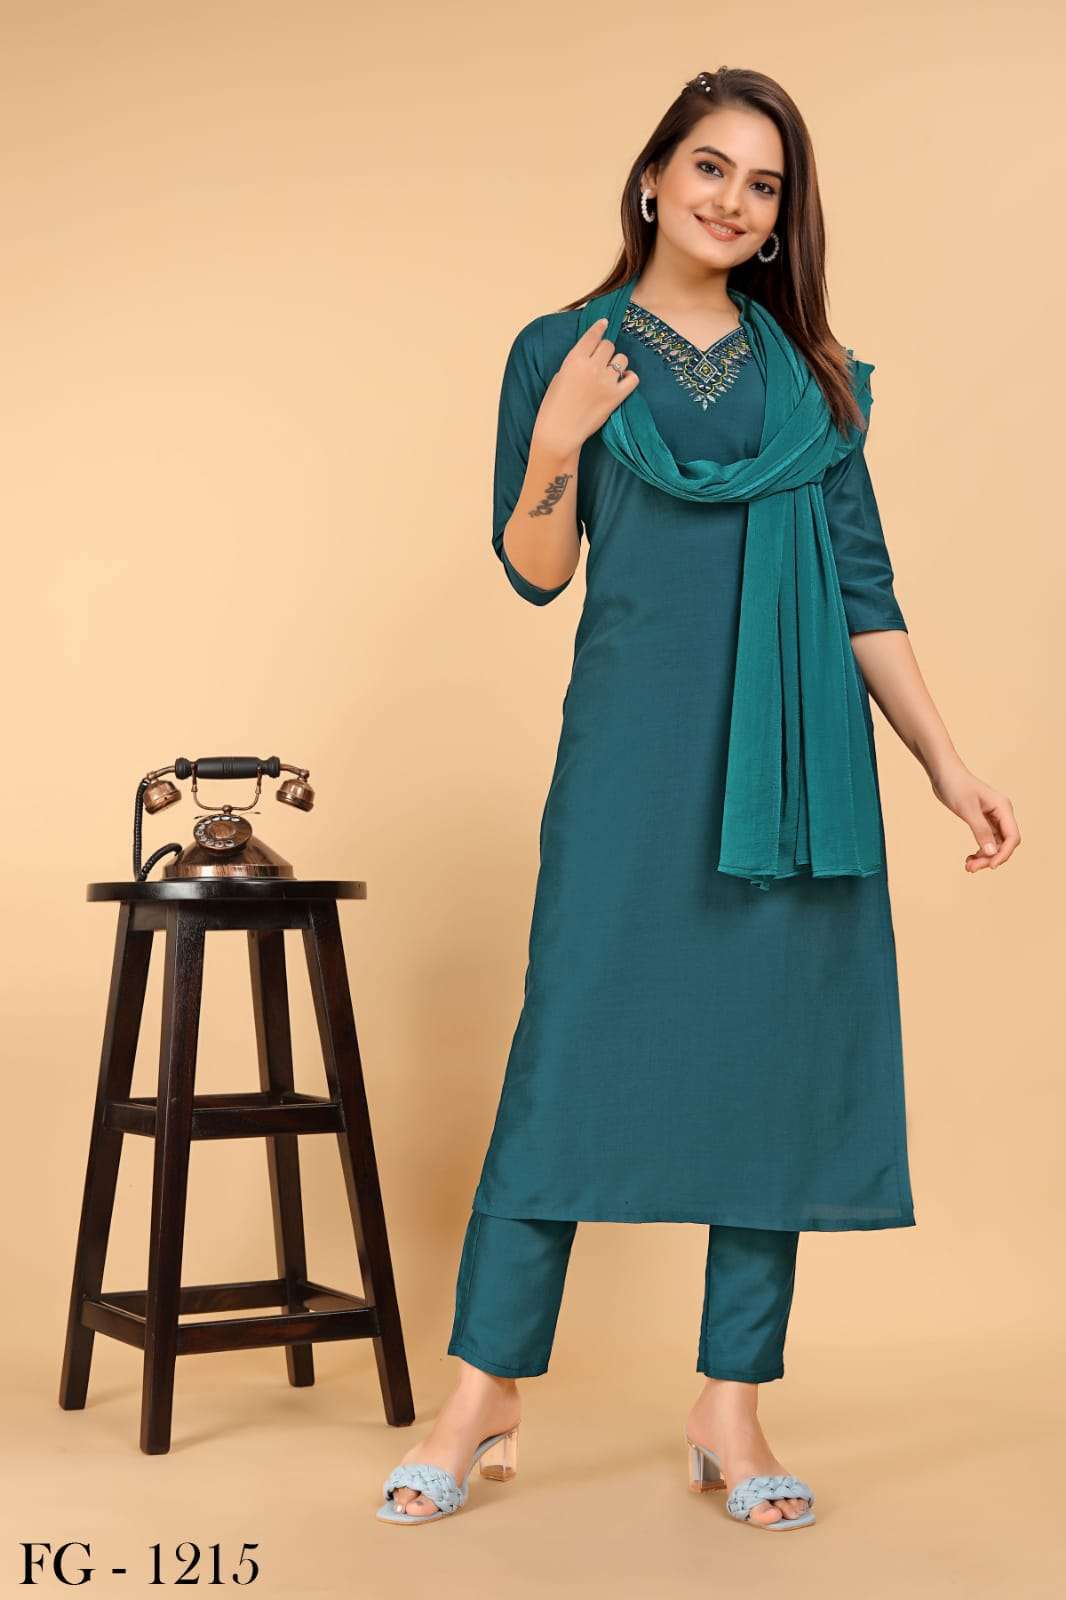 Latest Kurti Designs: Stay Fashionable with the Trends